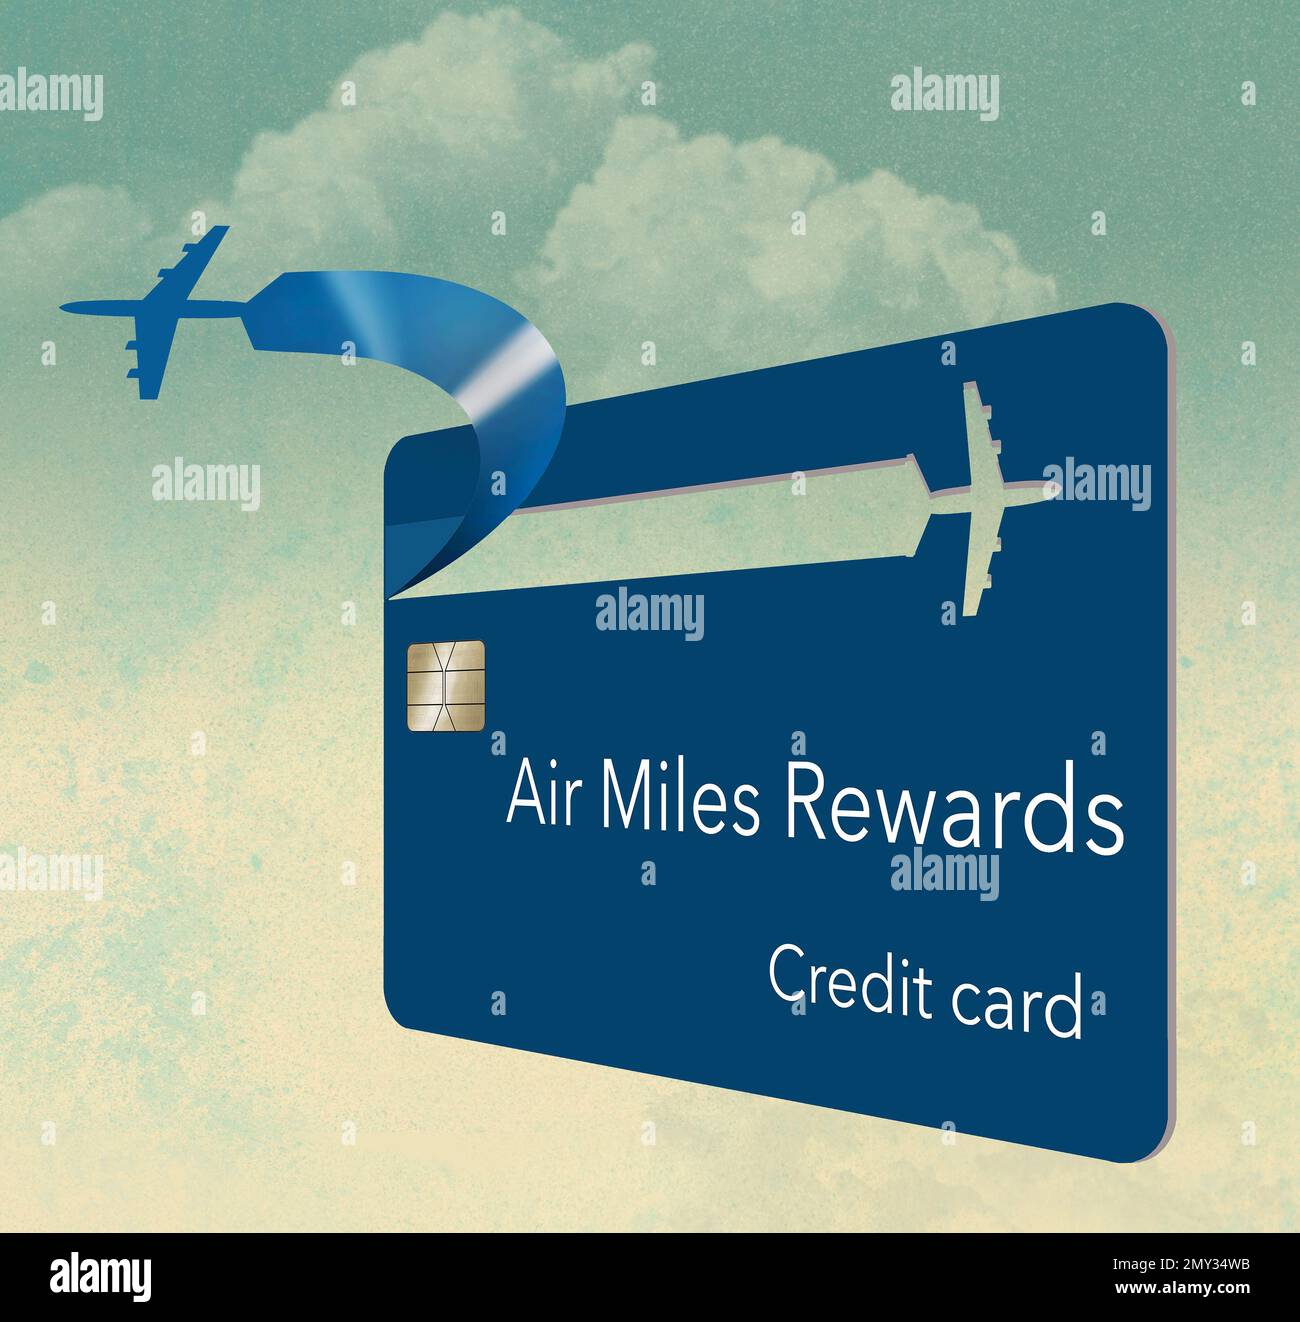 An airliiner peels off from the design on a generic air rewards credit card in a 3-d illustration about airline perks and free travel miles for using Stock Photo